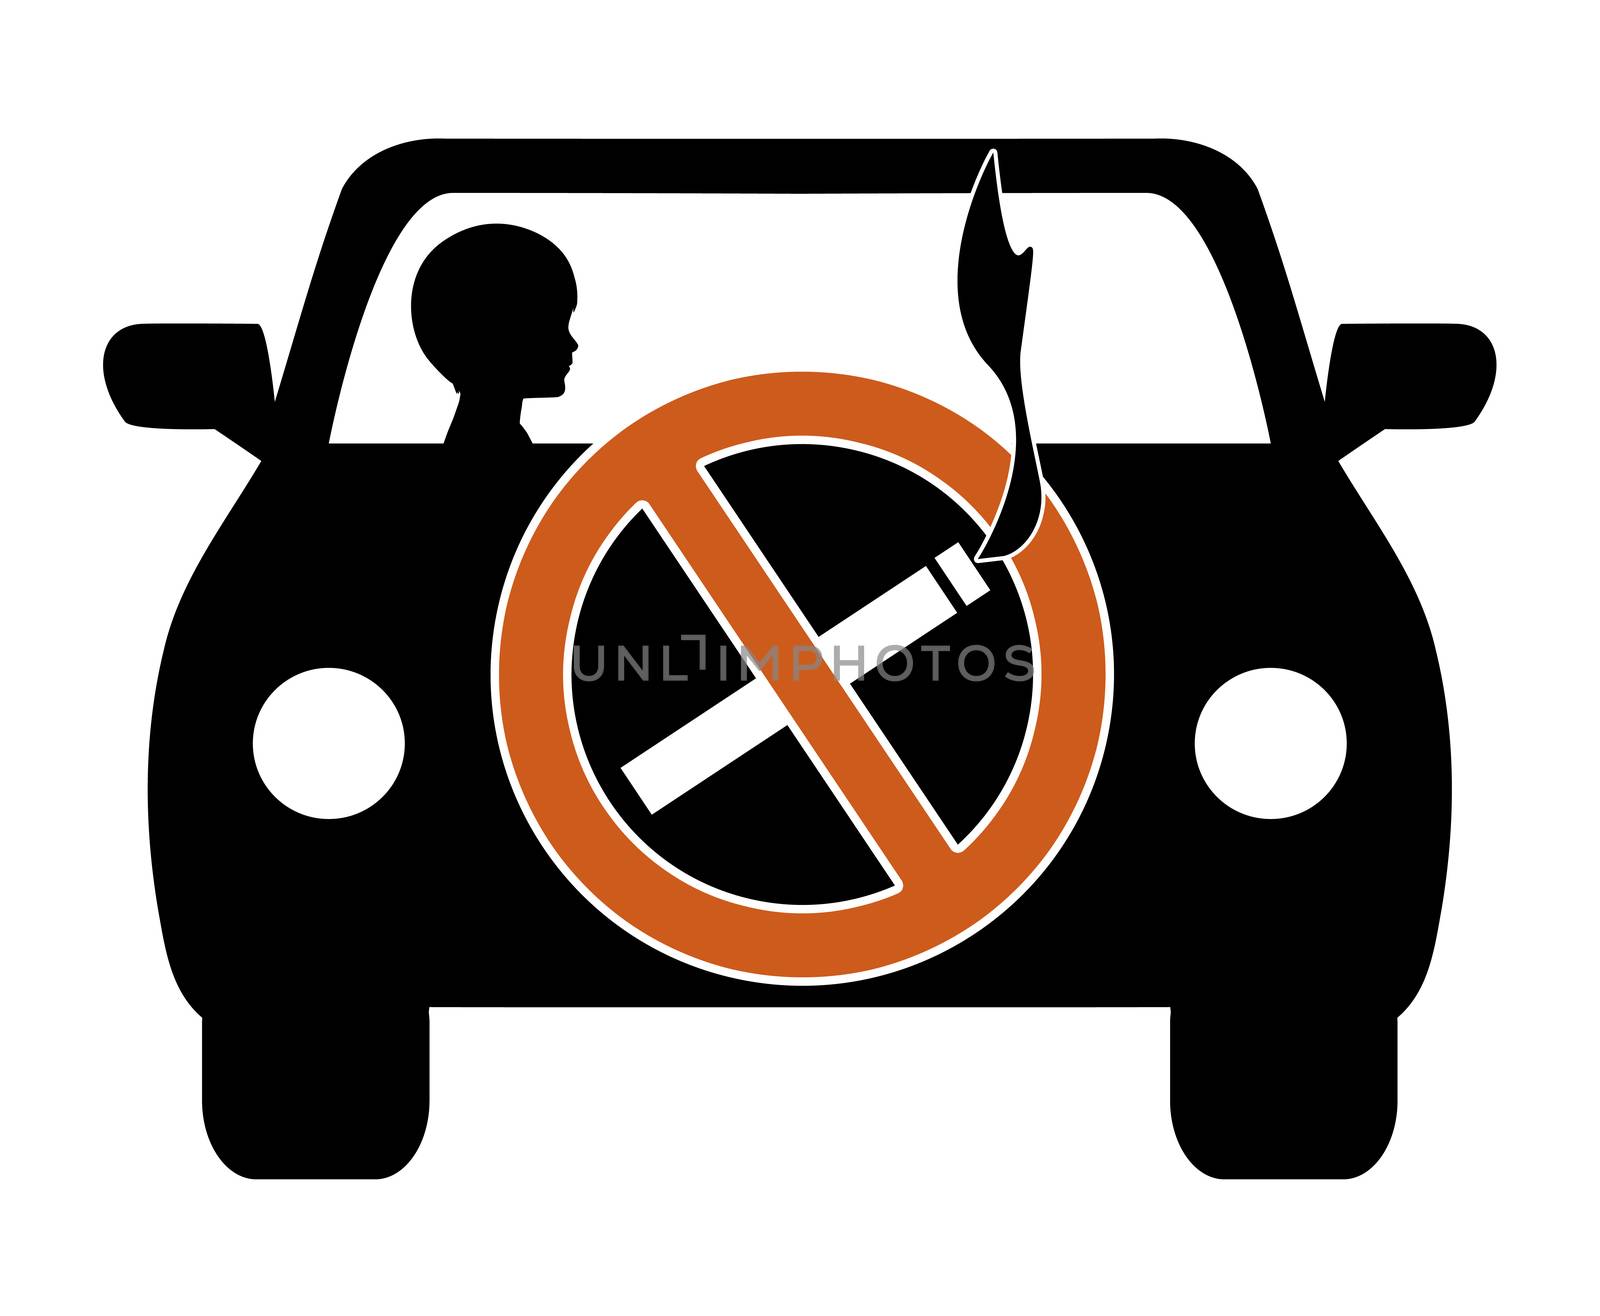 Smoking in private vehicles with minors must stop due to health risks